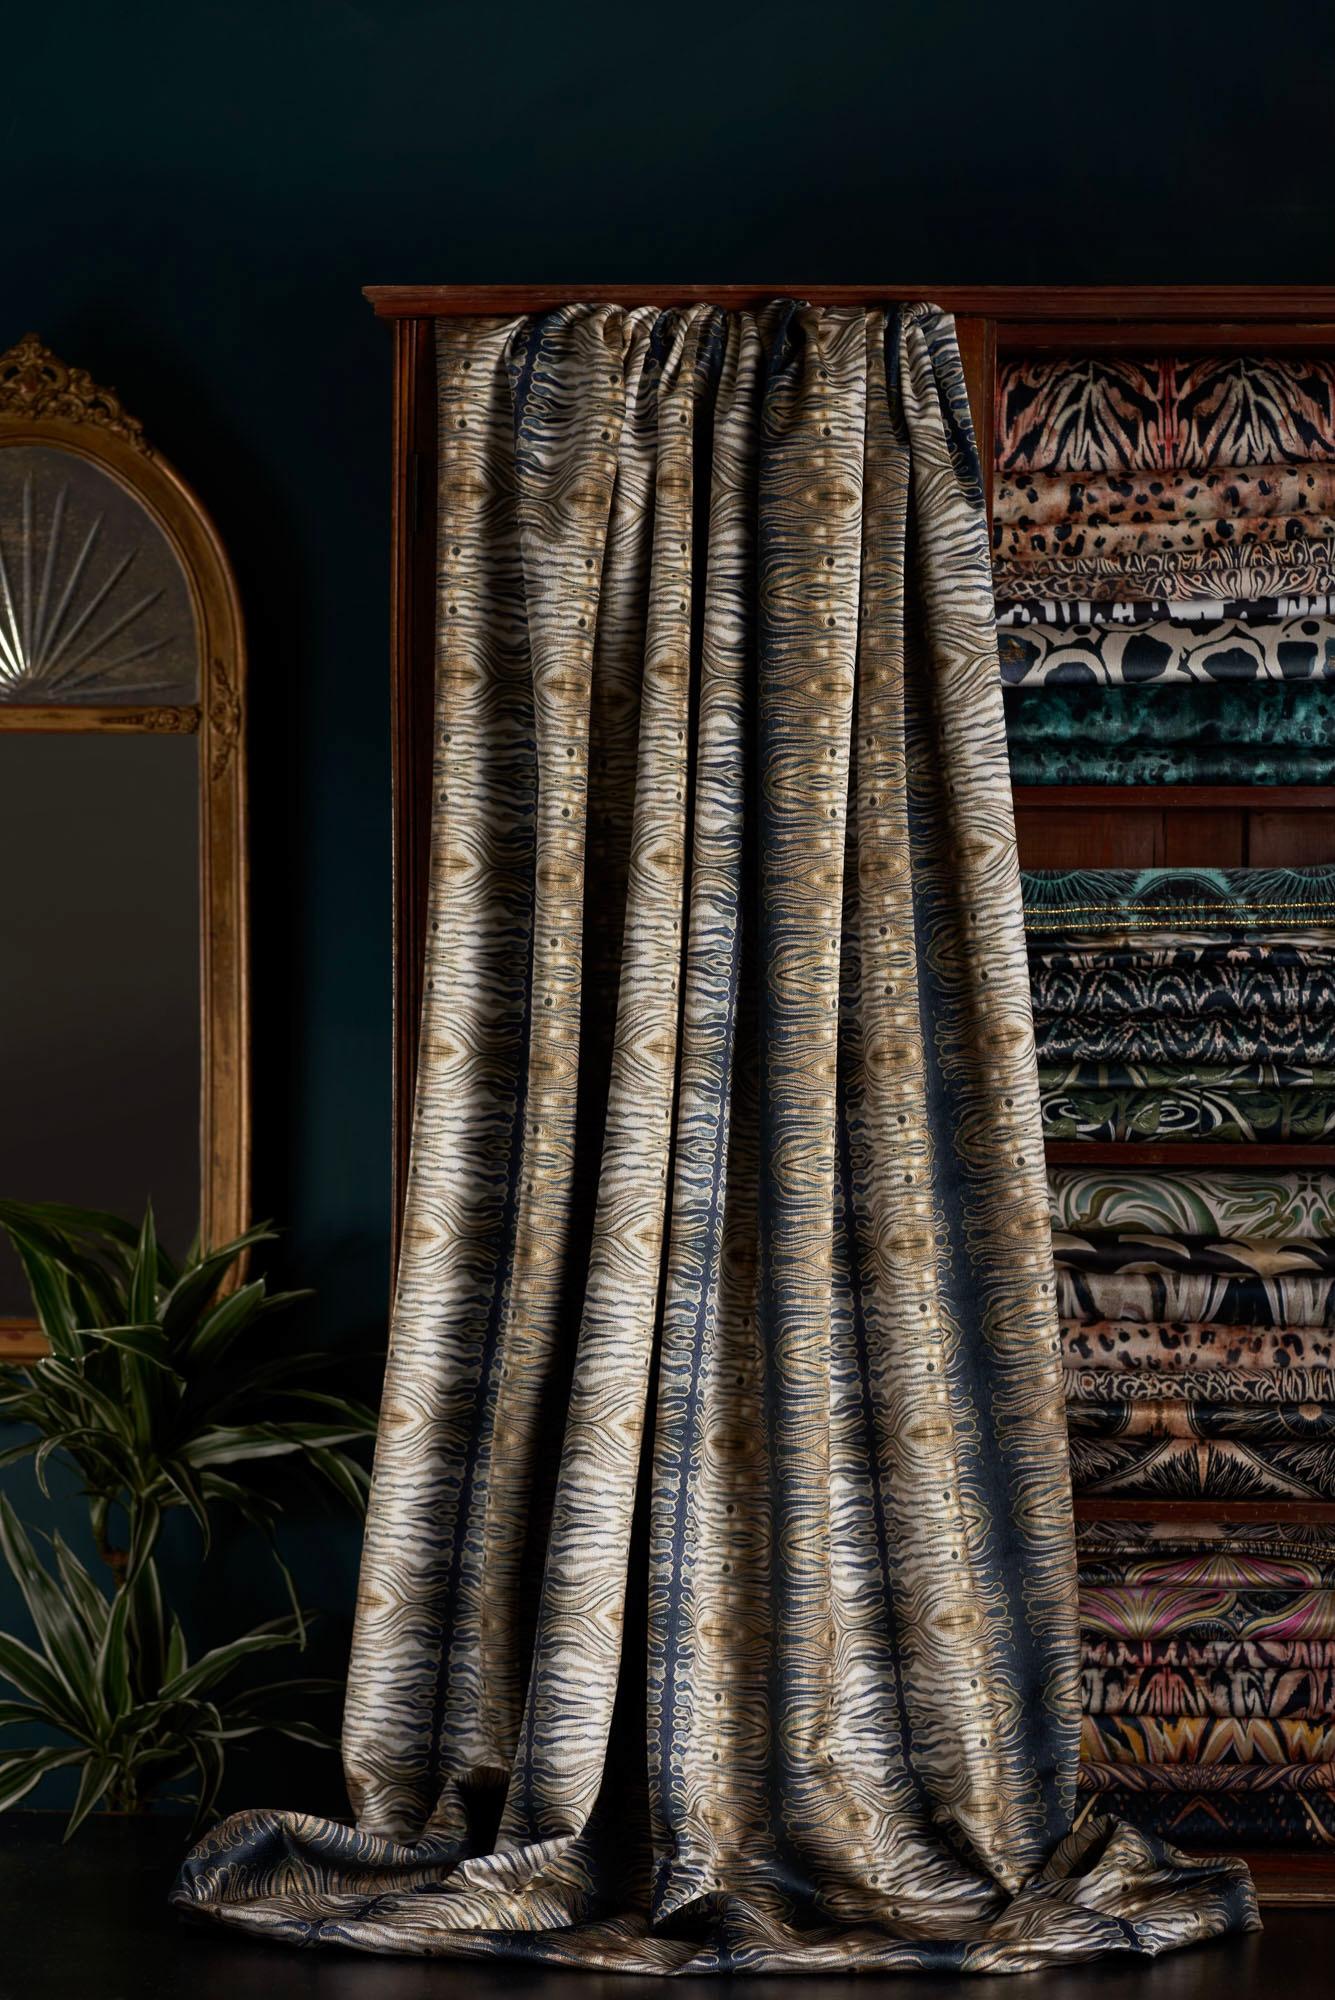 An animalesque design came from painting in gold, black, and teal strokes, dreamily and laid down using inks and liquid gold.

This velvet is midweight, with a strong straight woven backing, so is suitable for upholstery, but is also light enough